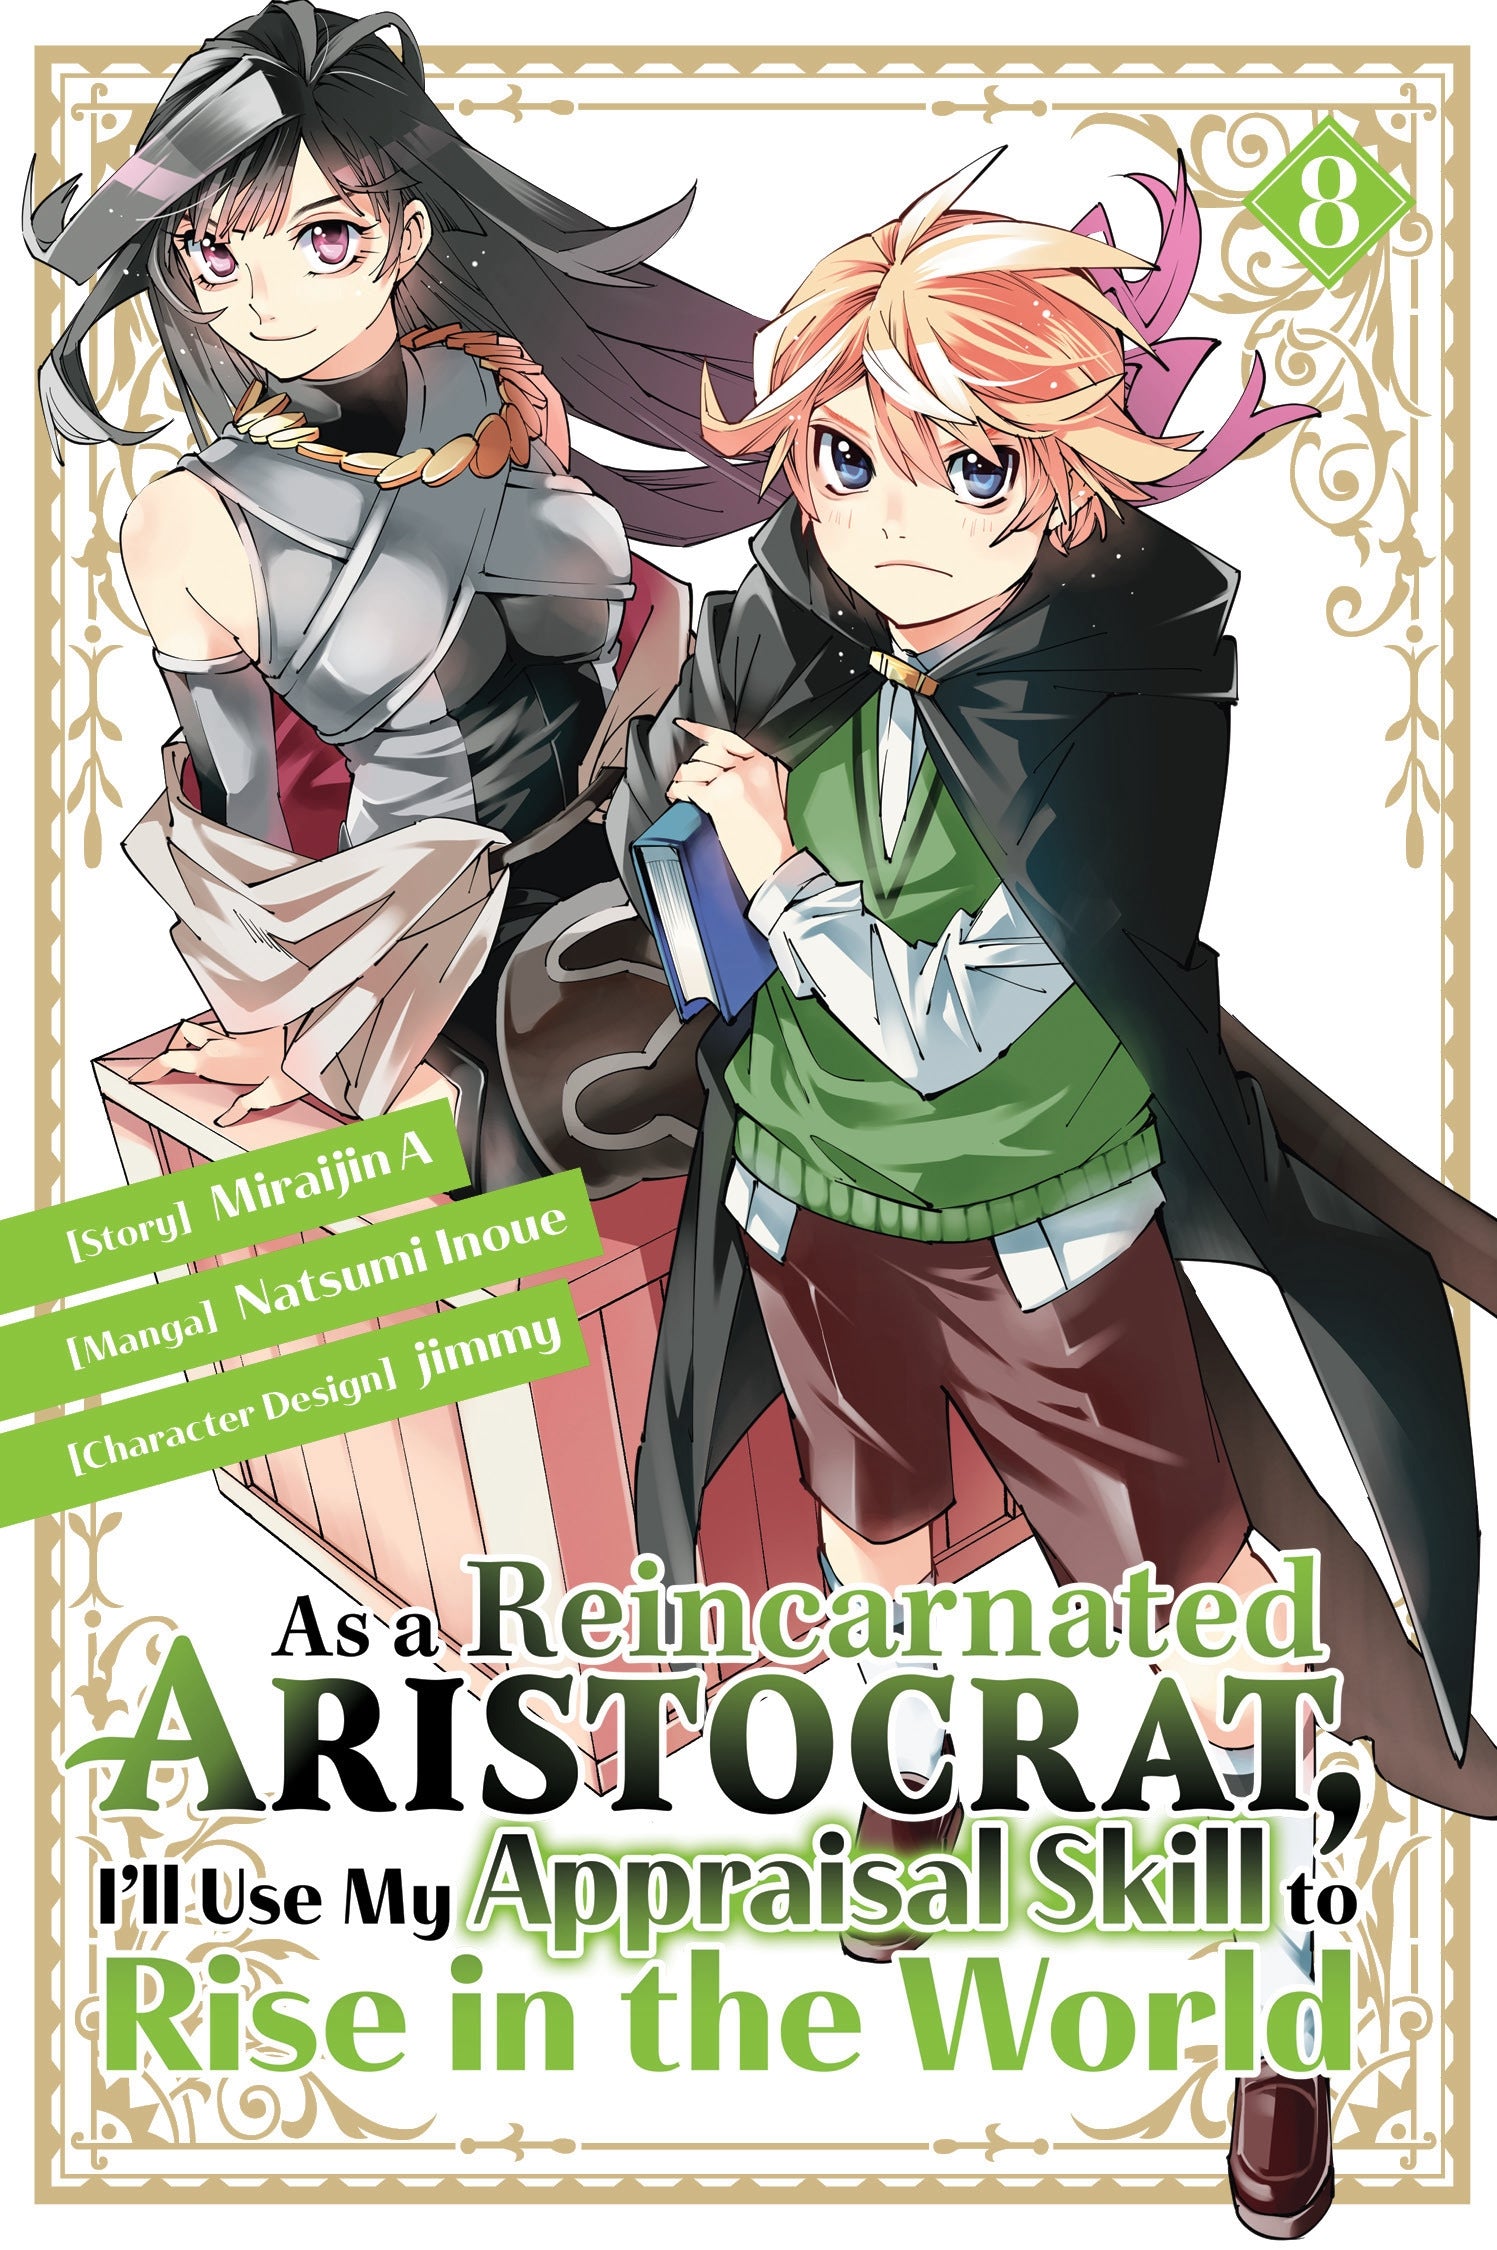 As a Reincarnated Aristocrat, I'll Use My Appraisal Skill to Rise in the World (Manga), Vol. 8